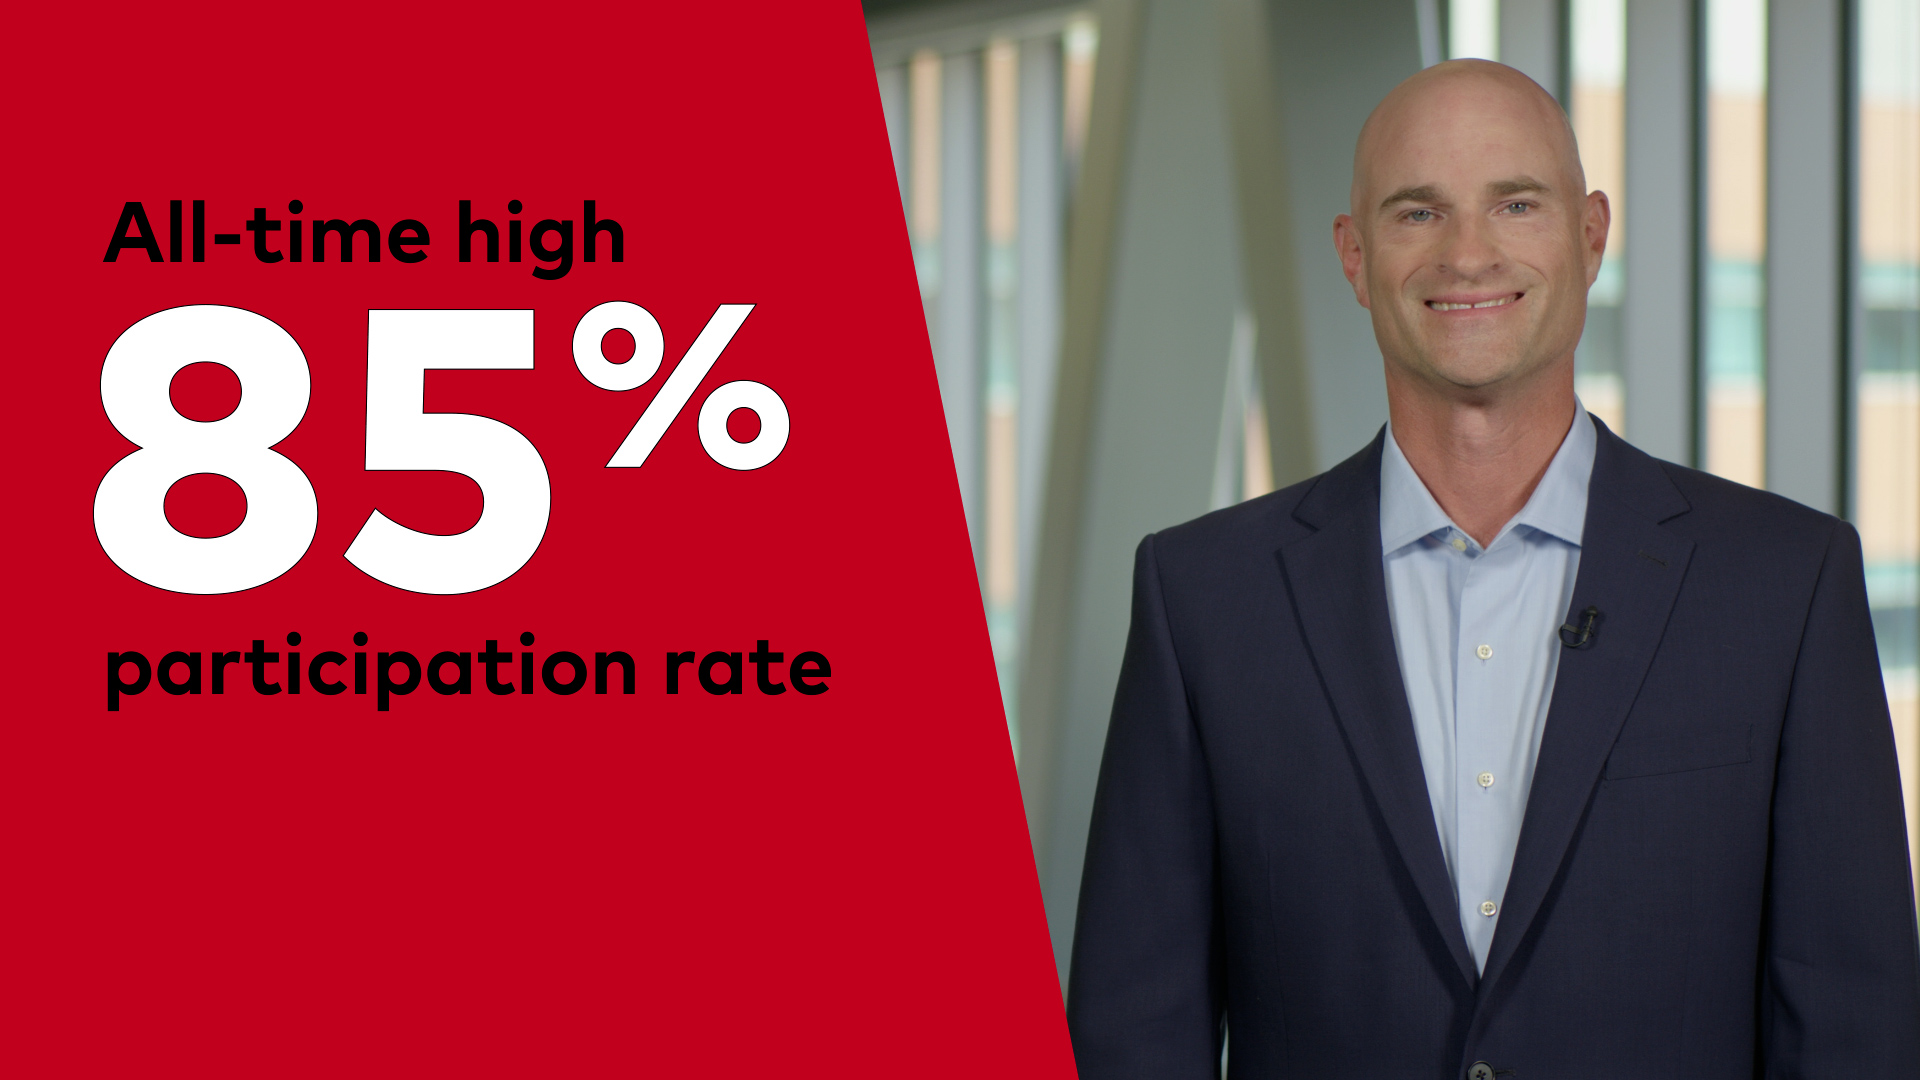 Next to “All-time high 85% participation rate” is a photo of Vanguard’s Jeff Clark. There’s a link to a video in which Jeff discusses how plan designs grew stronger in 2022 thanks to automatic solutions. 